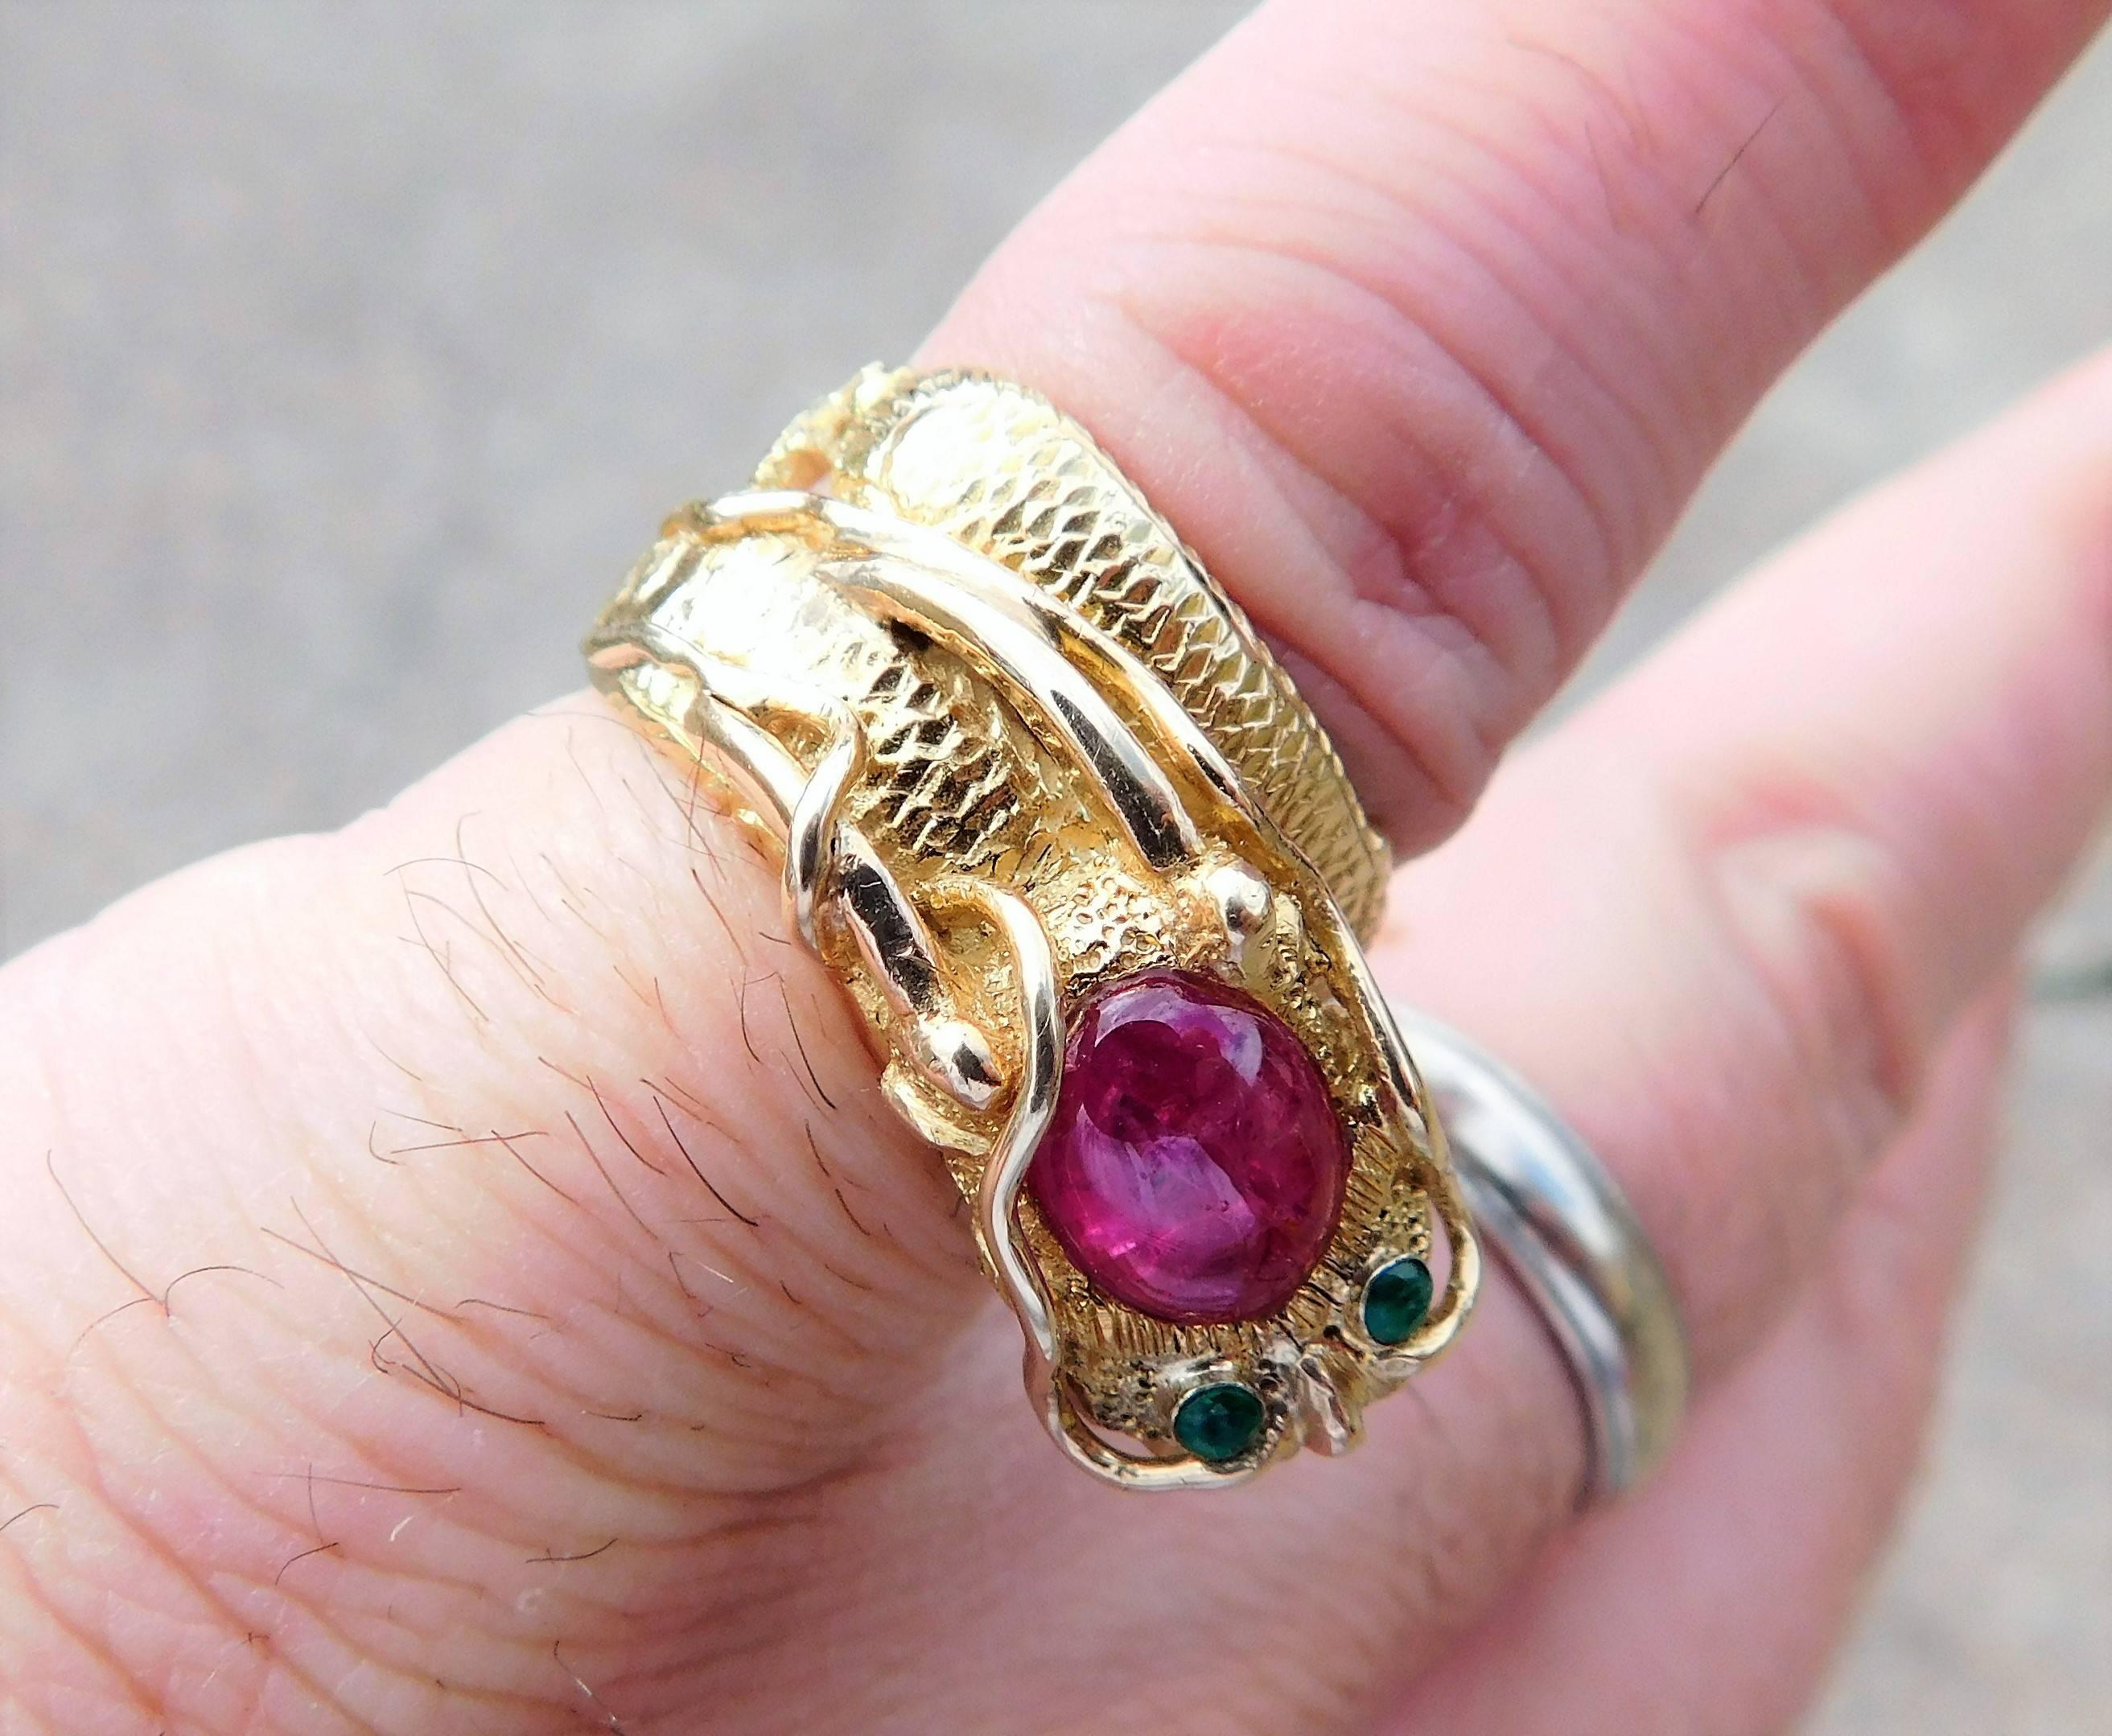 Handcrafted 14 Karat Gold Ruby and Emerald Serpentine Dragon Ring 3